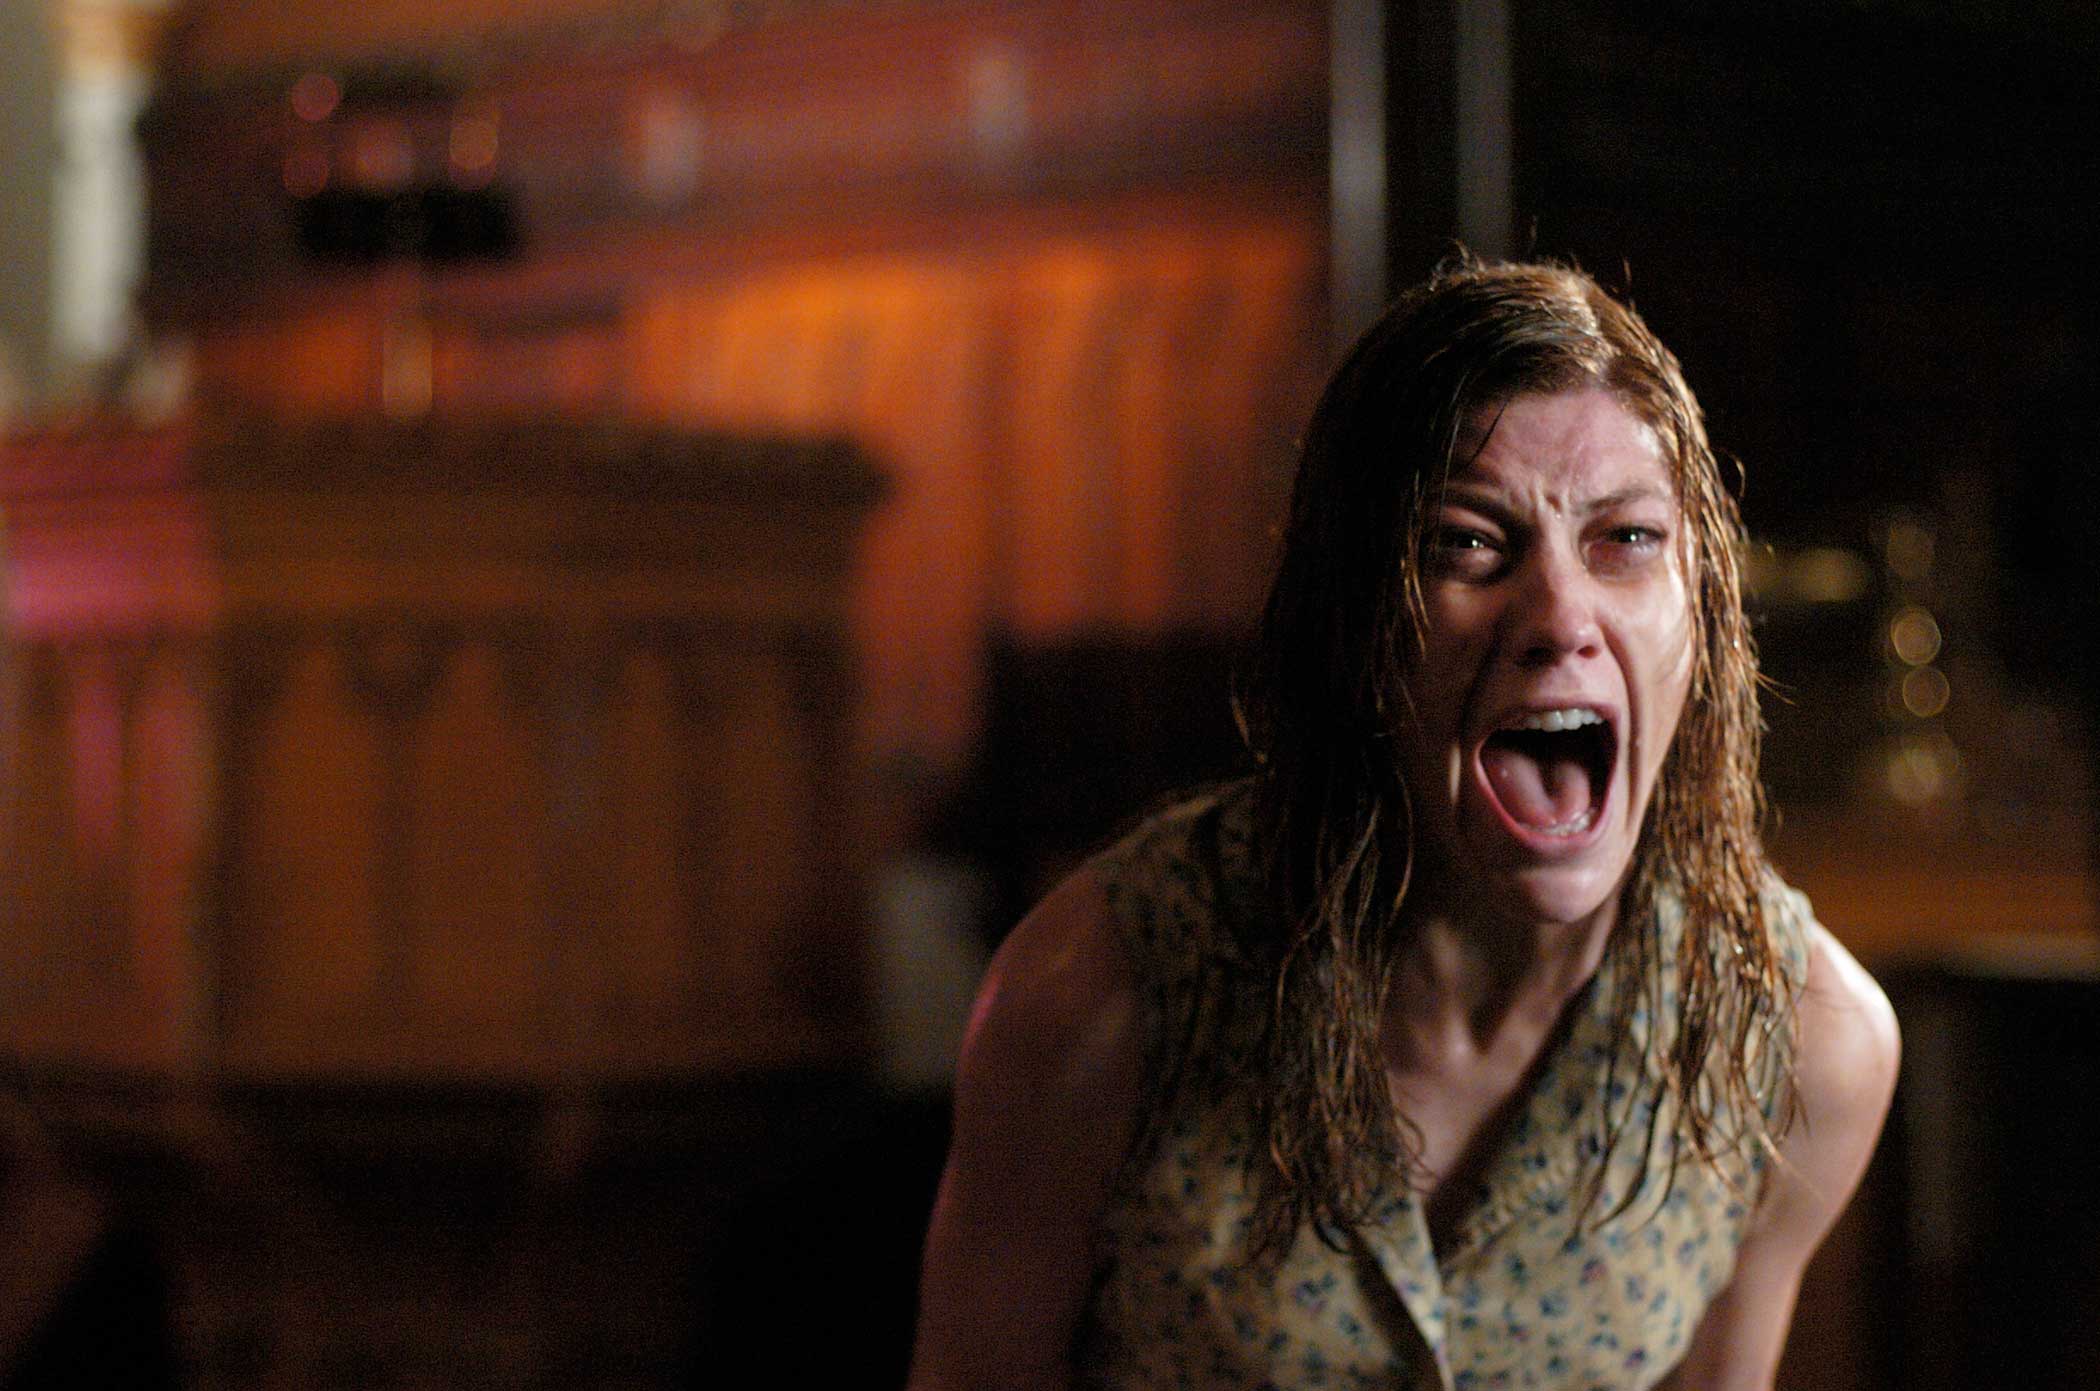 The Exorcism of Emily Rose, 2005 The film is loosely based on the story of Anneliese Michel, a German woman who in 1975 underwent a Catholic exorcism, but died in 1976 due to malnourishment and dehydration, with her parents and the priests involved being charged with negligent homicide.